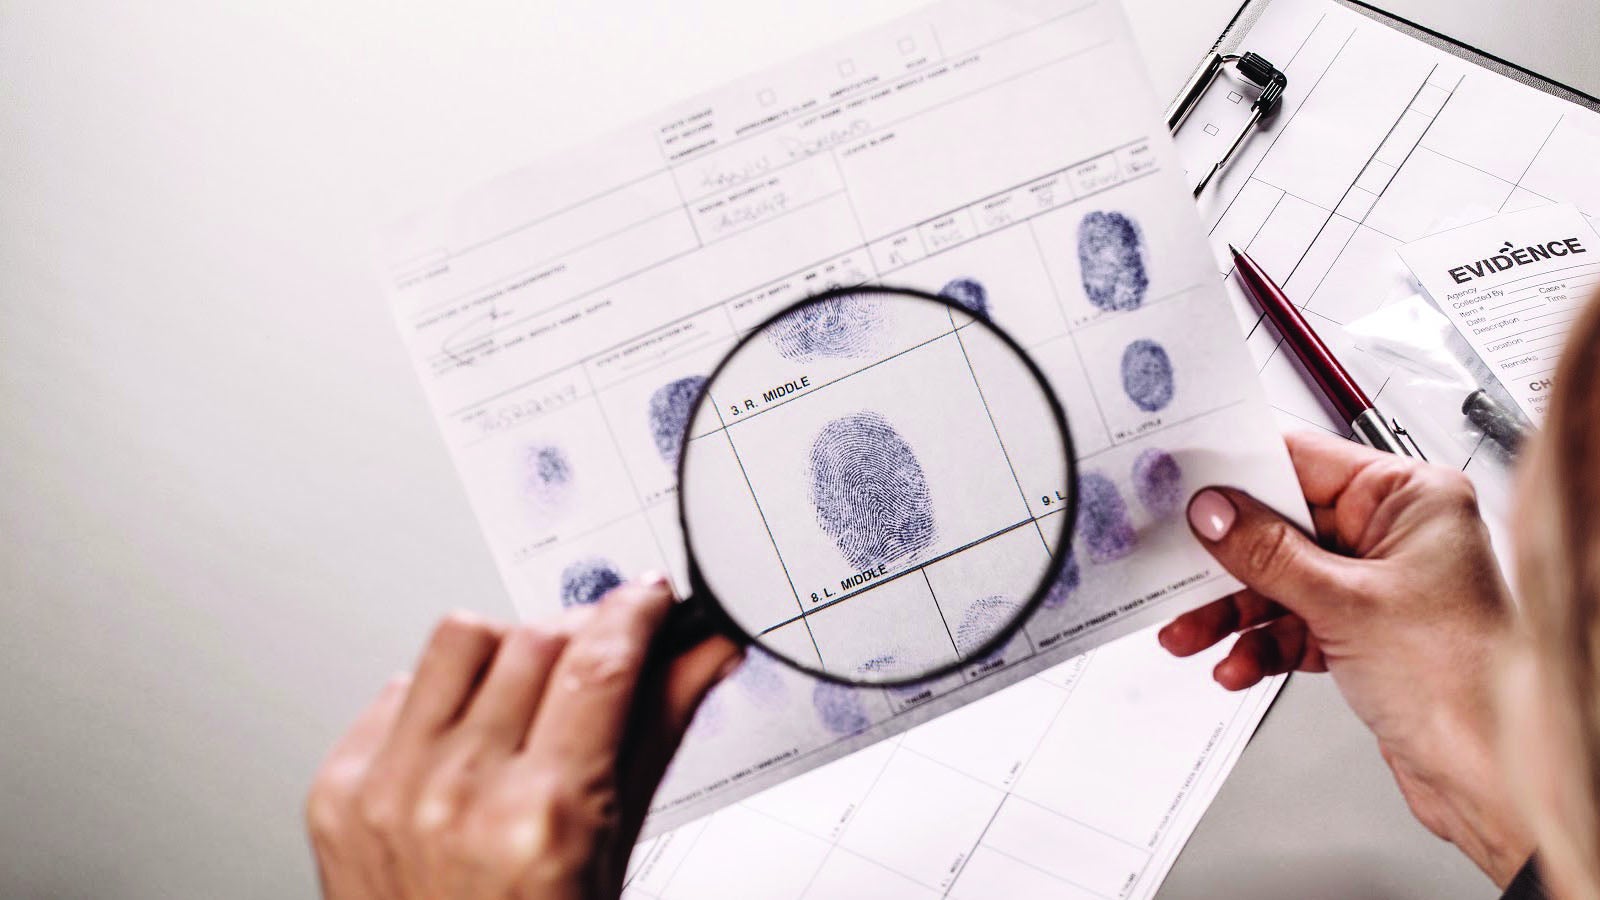 A pair of hands closely examines a set of fingerprints with a magnifying glass.